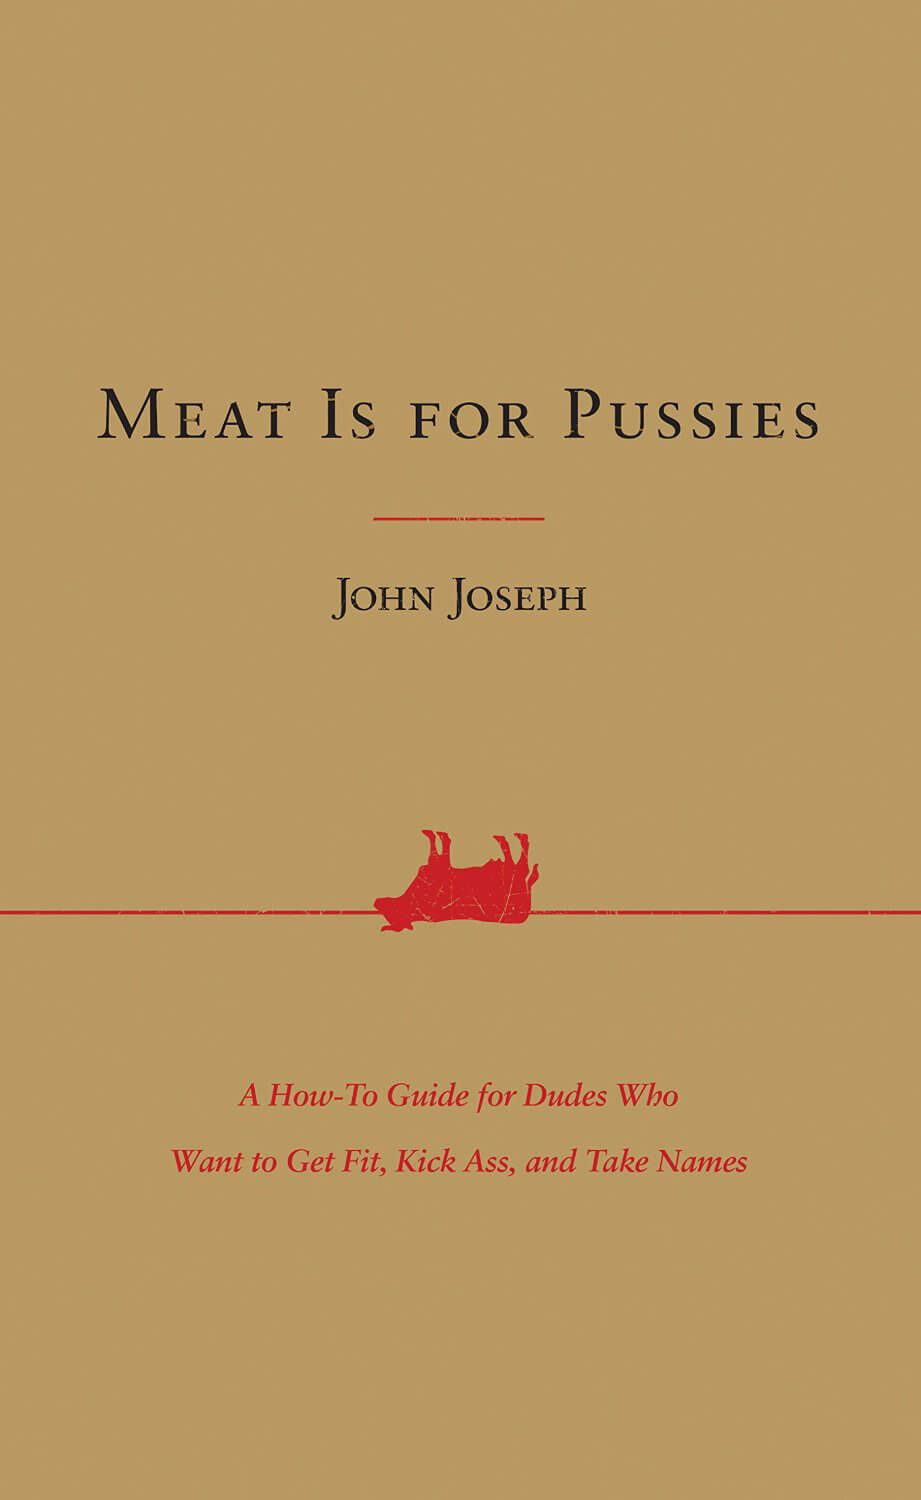 Meat is for Pussies by John Joseph